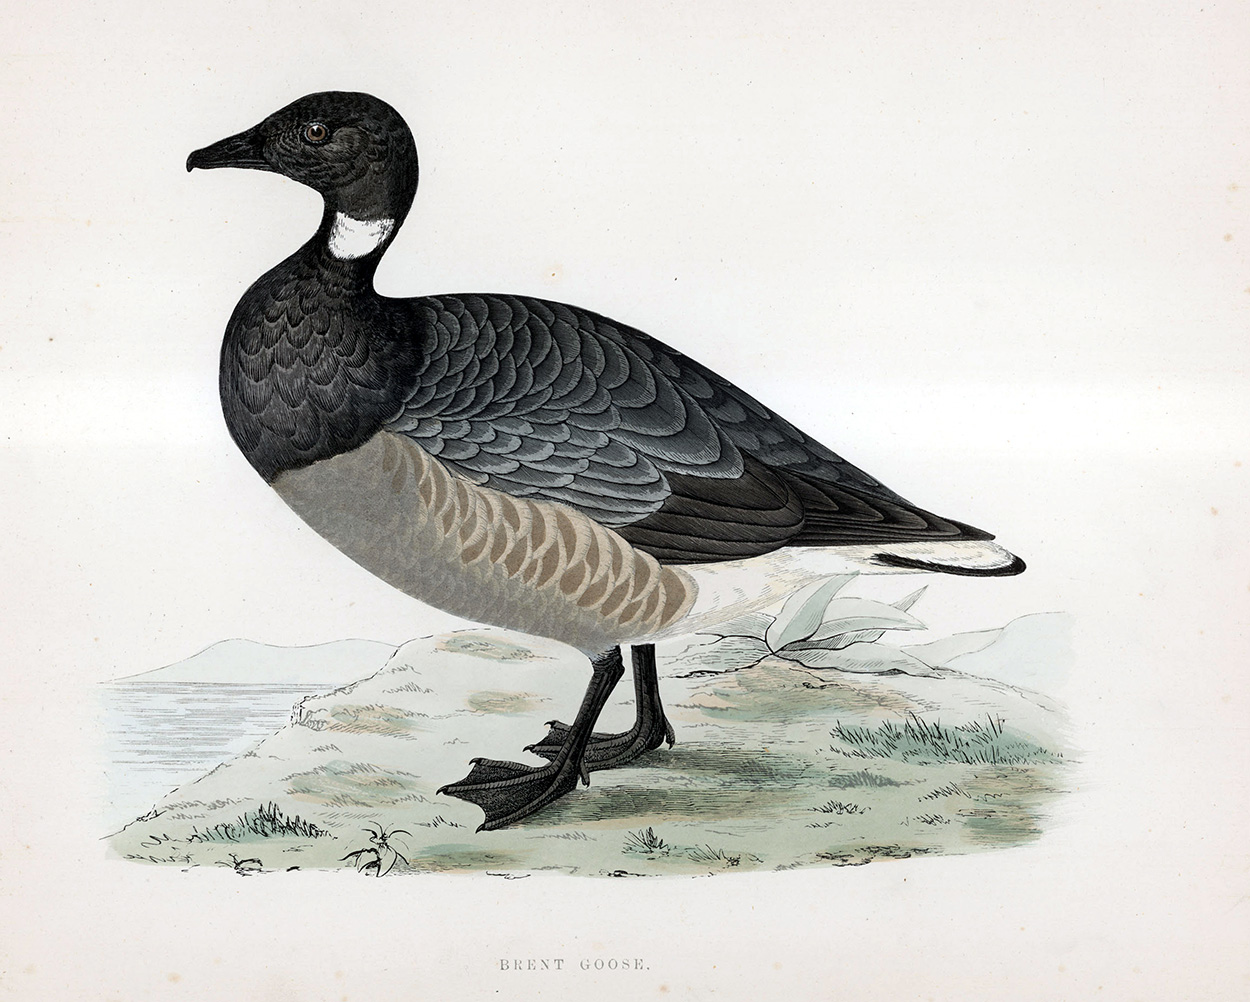 Brent Goose - hand coloured lithograph 1891 (Print) art by Beverley R Morris Art at The Illustration Art Gallery